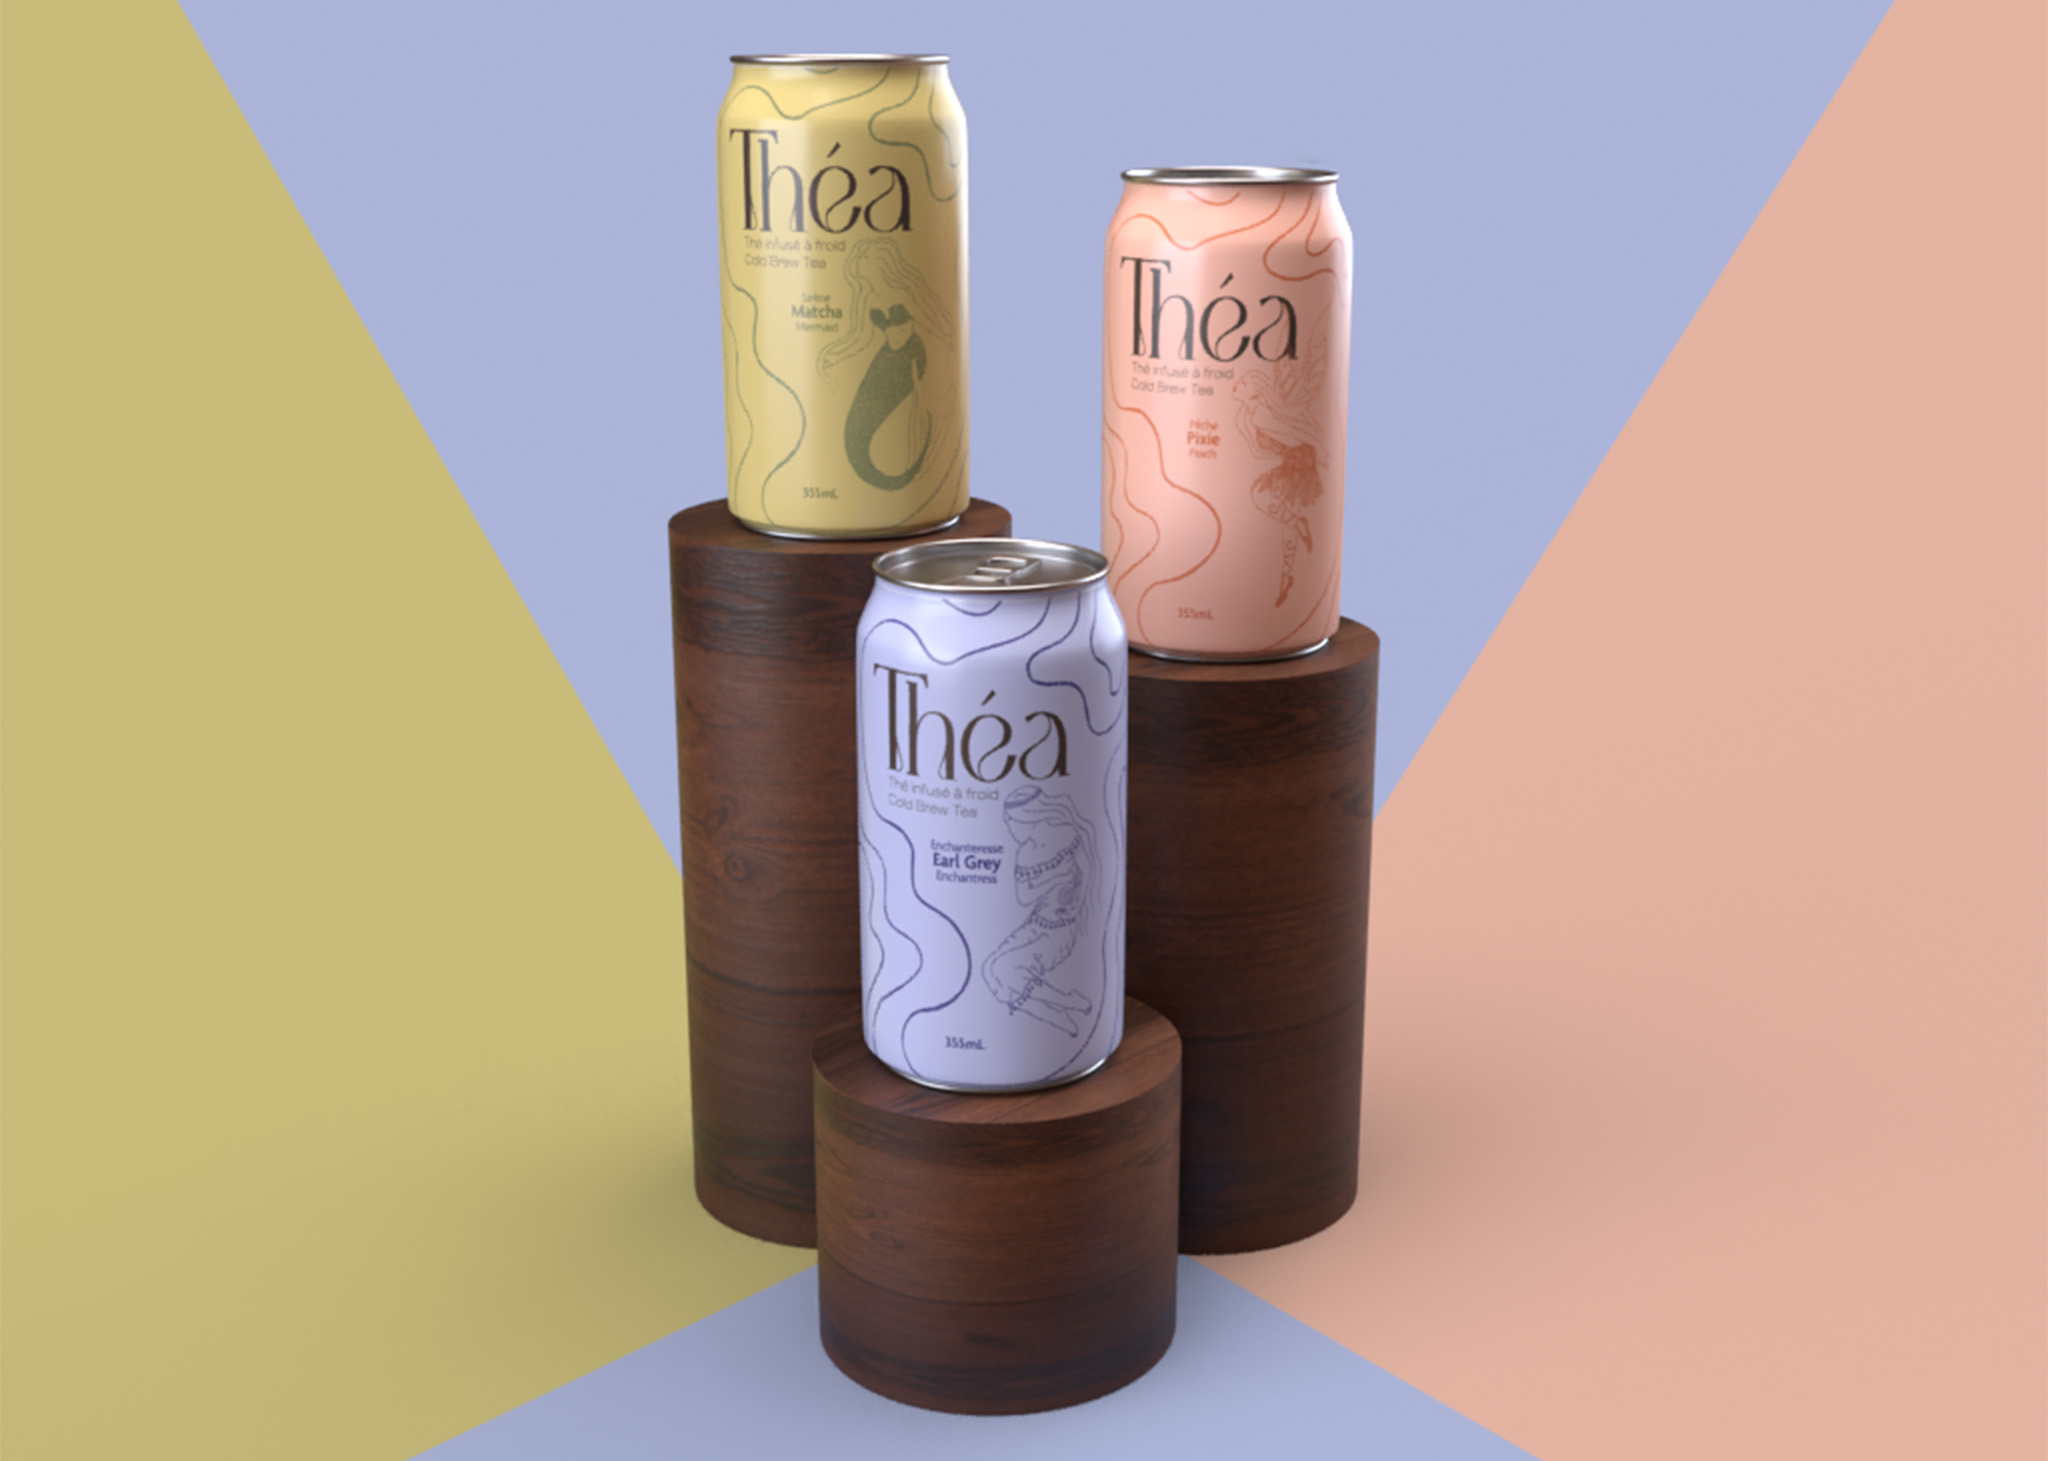 Design mockup of three cans of different flavoured teas displayed on wood stands.